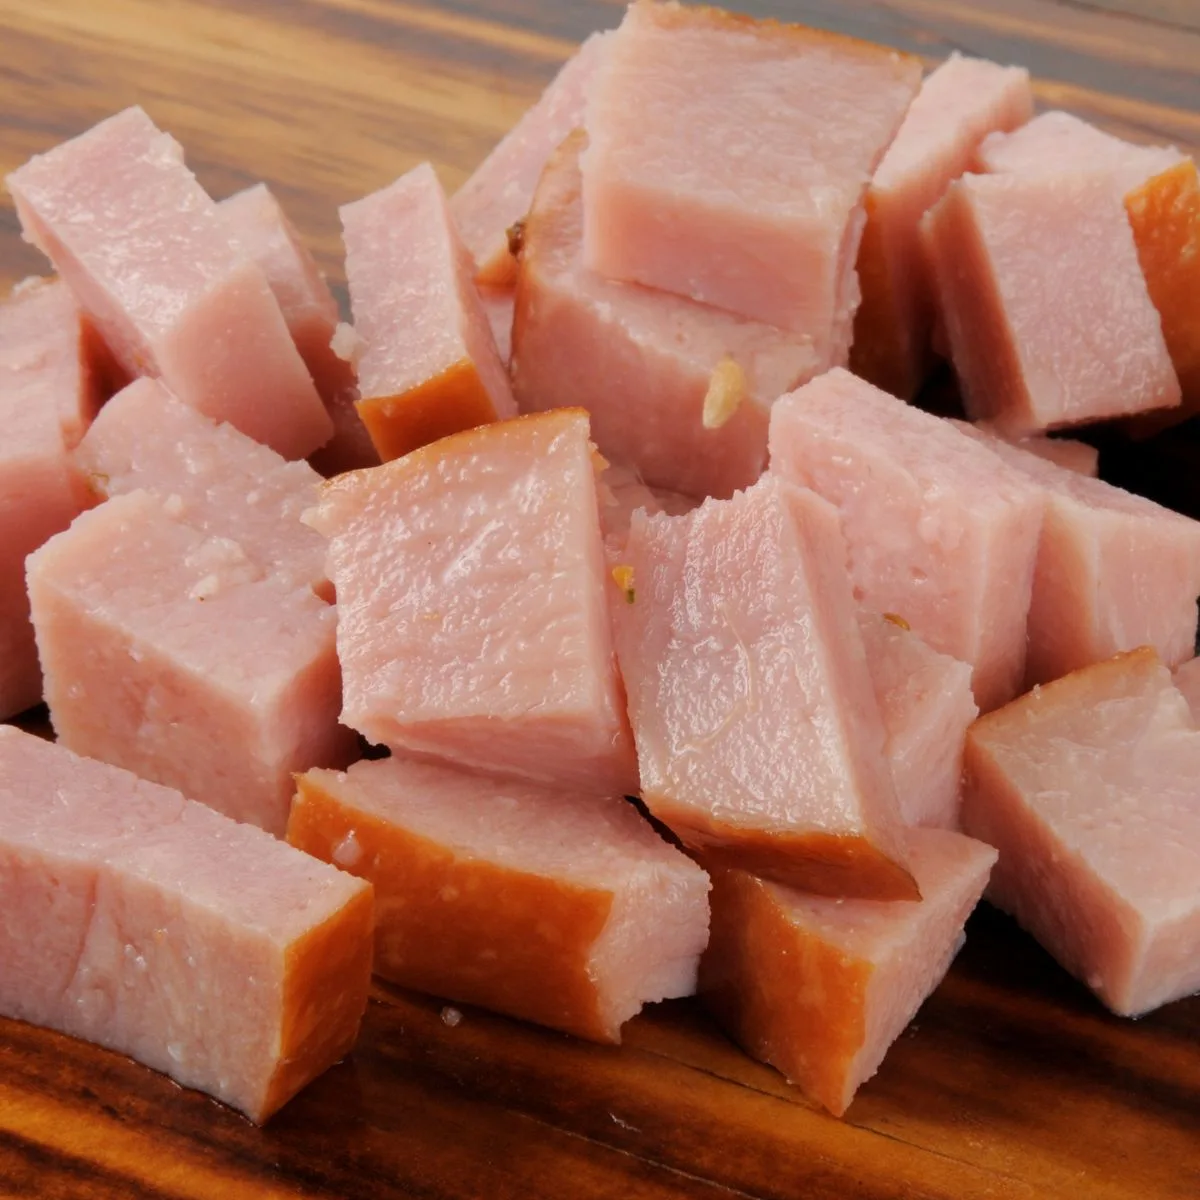 Cubed leftover ham on wooden cutting board